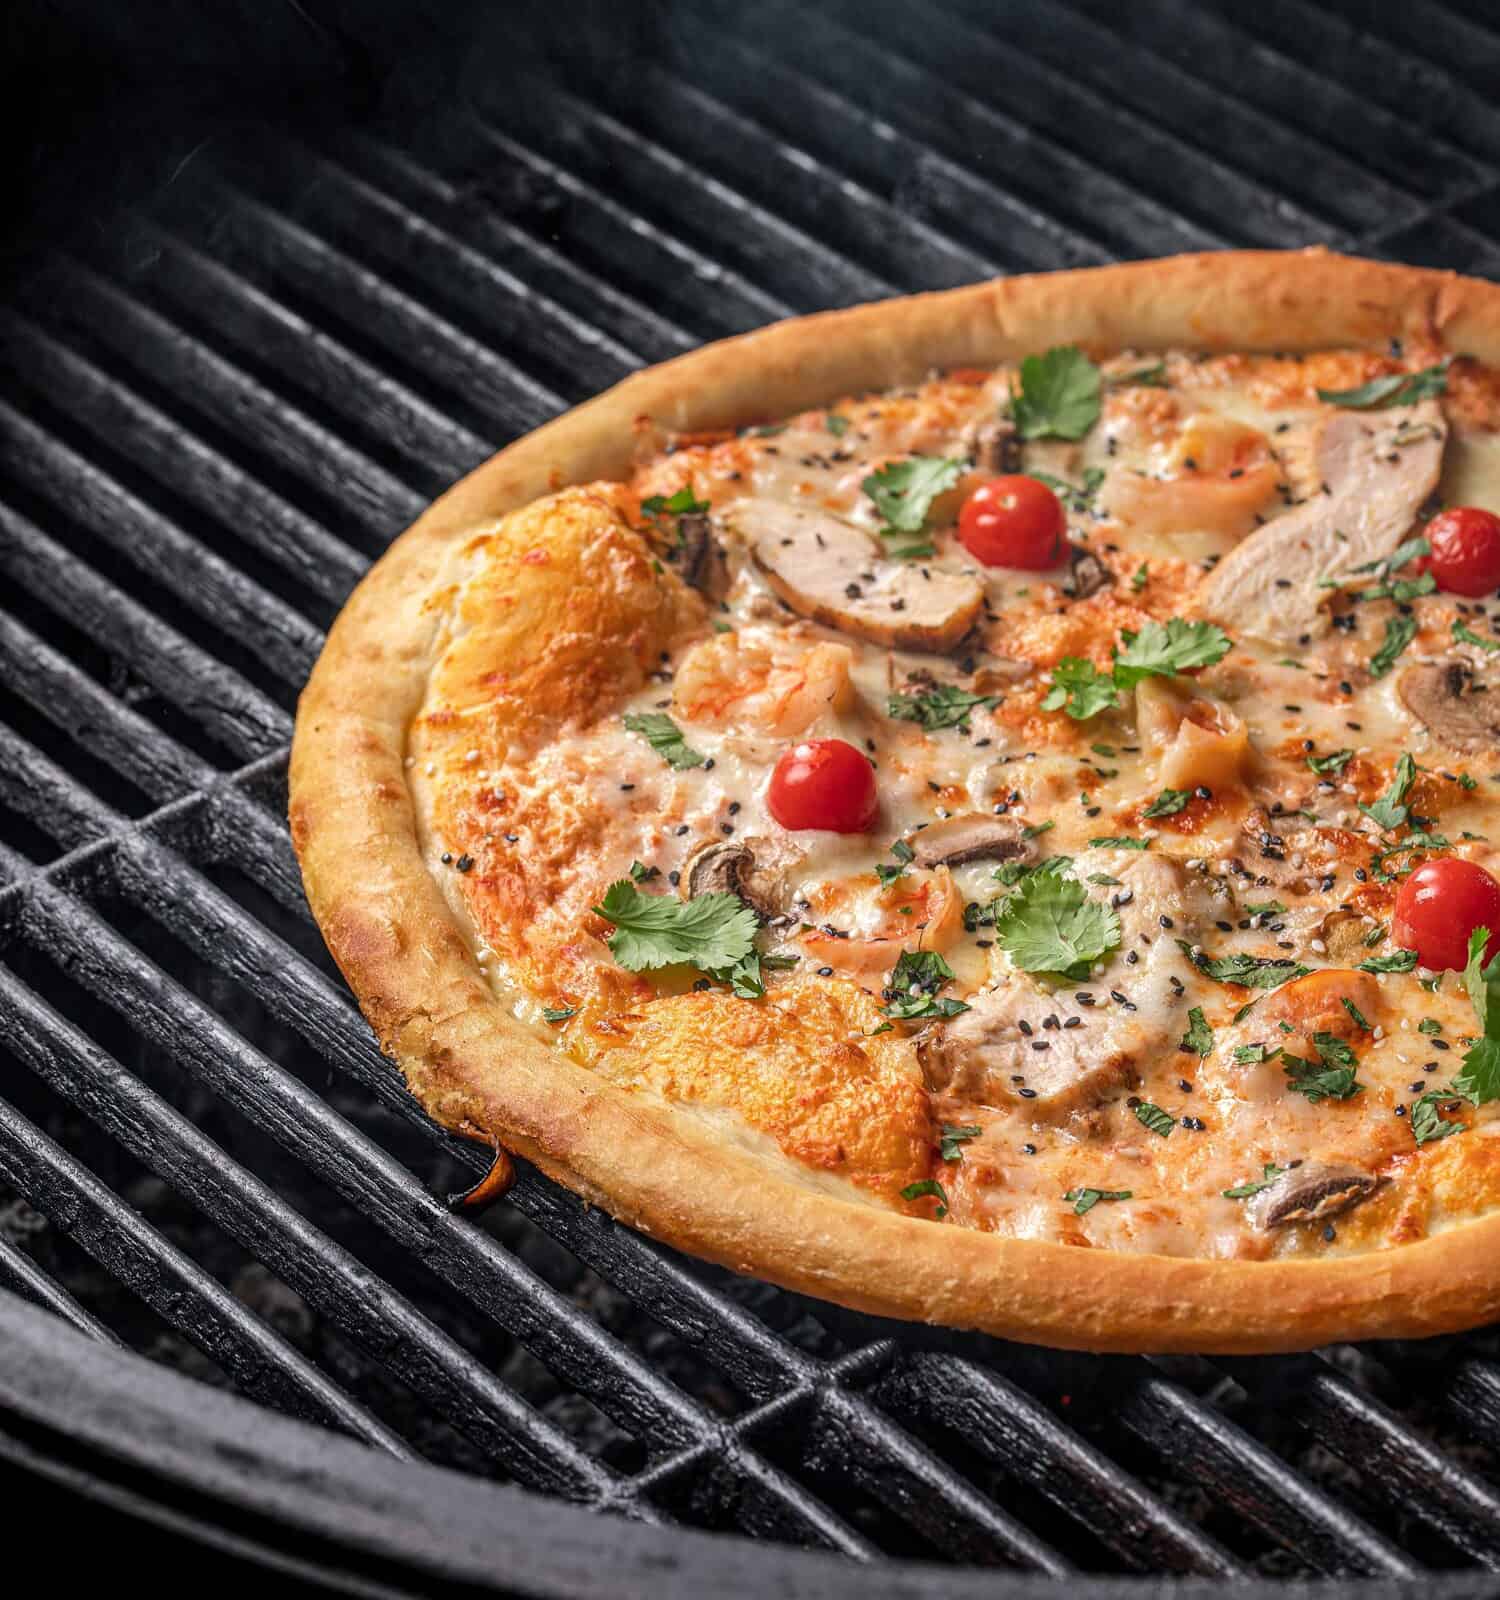 Cast Iron vs Pizza Stone: Main Differences, Pros, and Cons